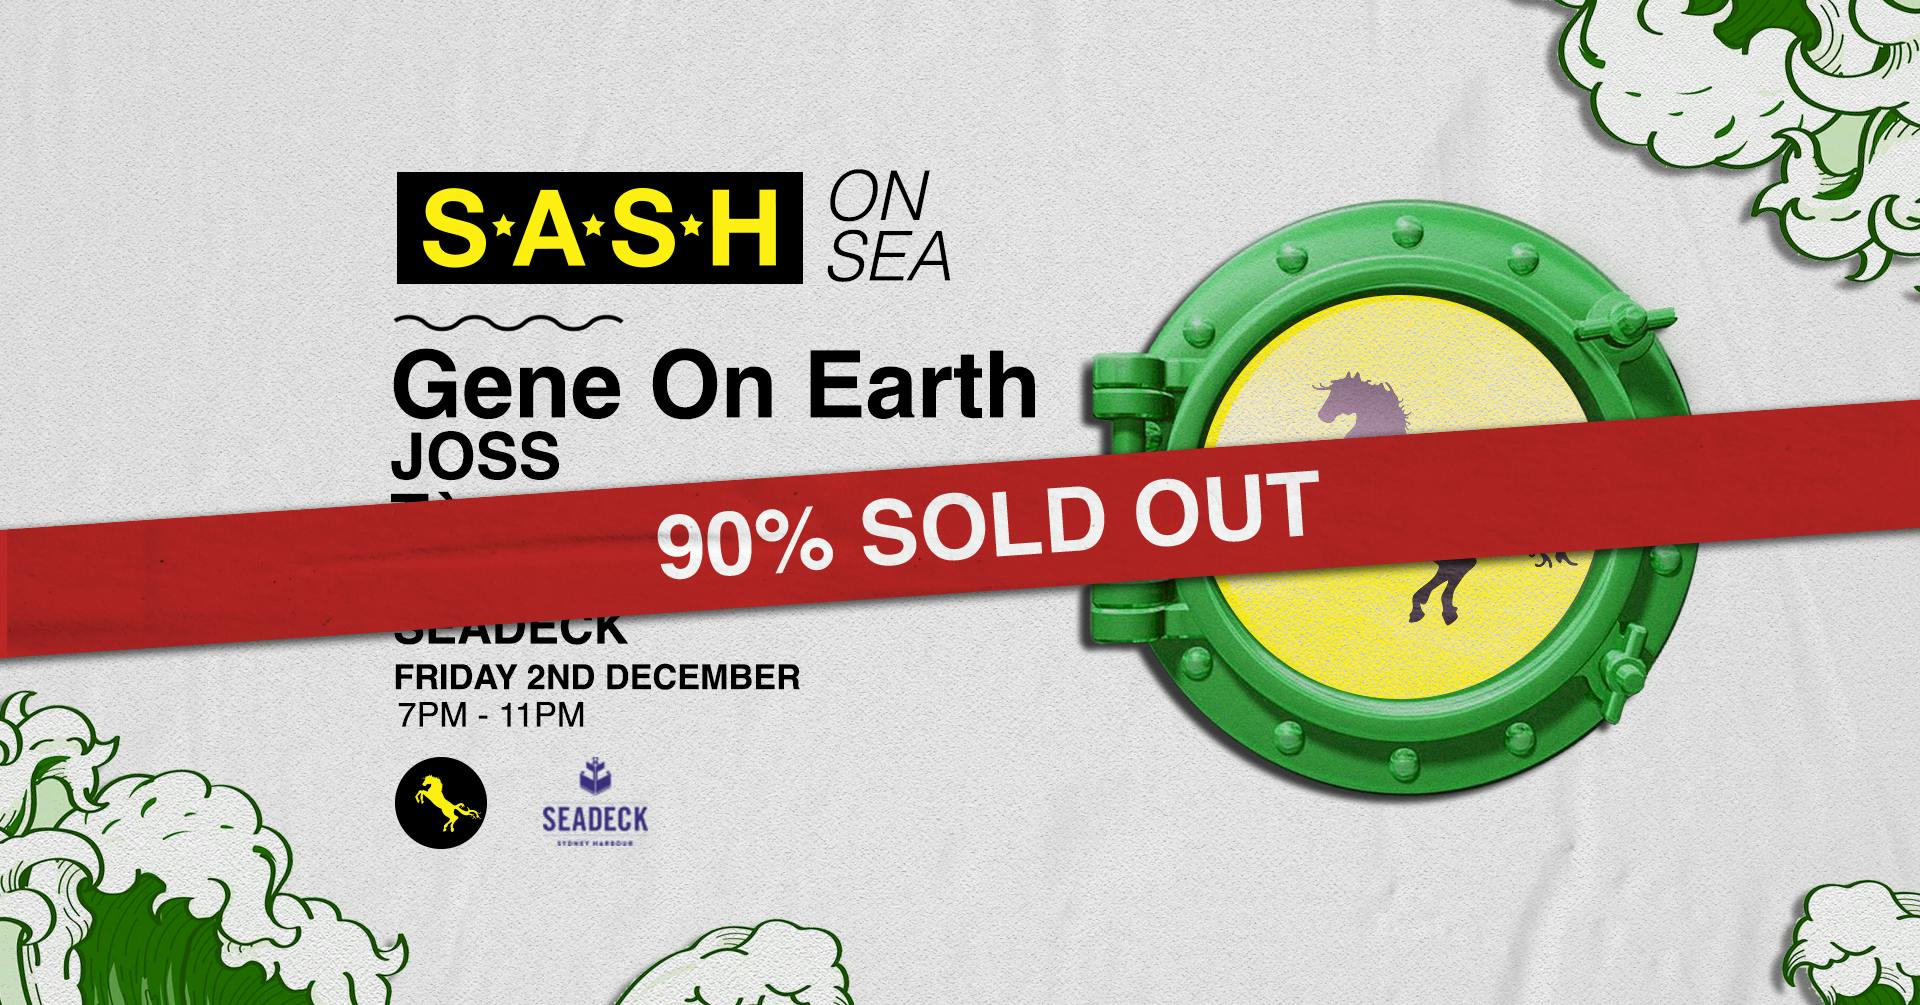 ★ S*A*S*H On Sea ★ Gene On Earth ★